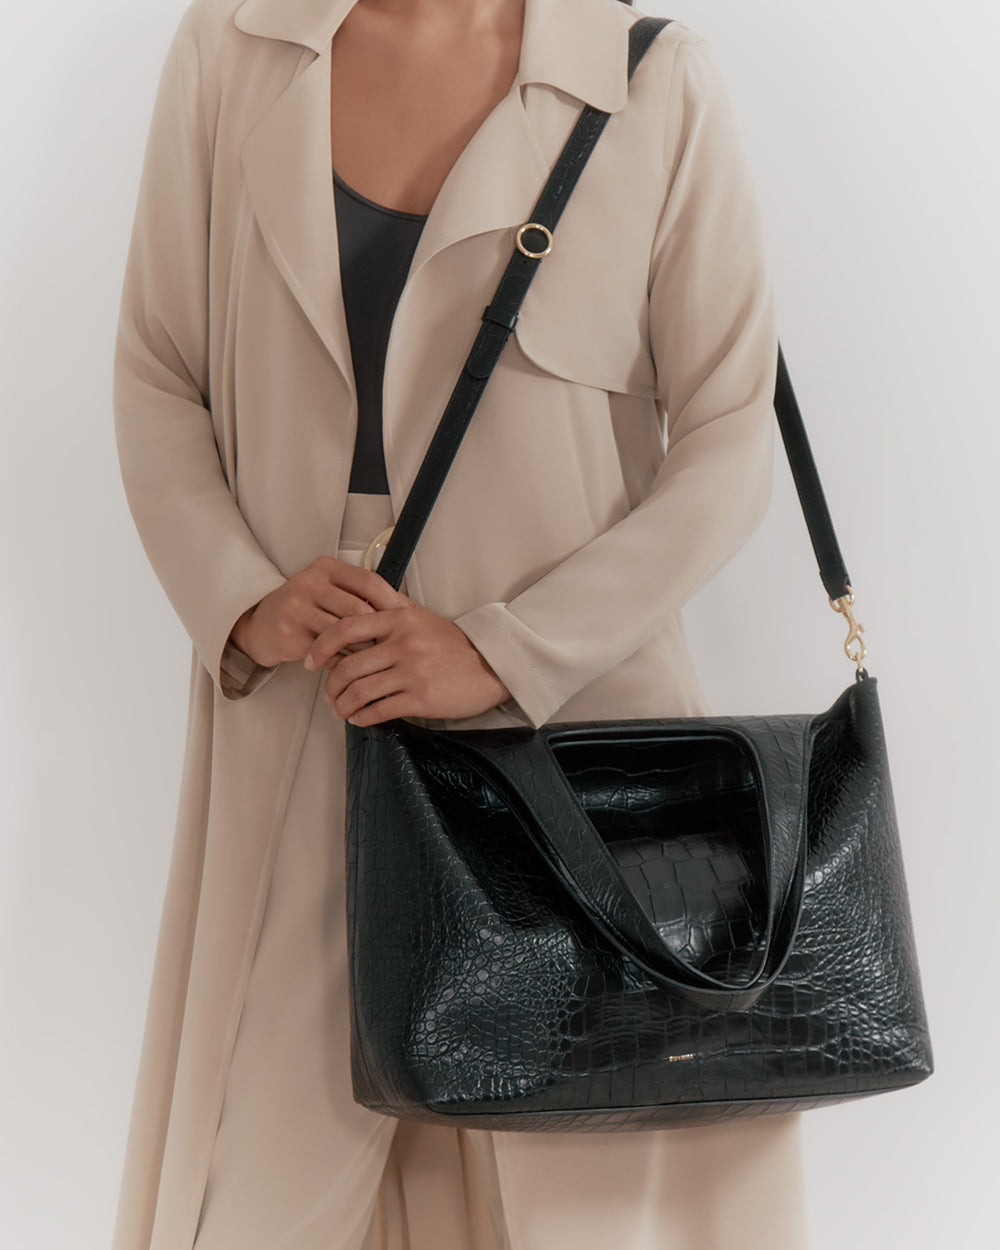 Person holding a large handbag with a shoulder strap.